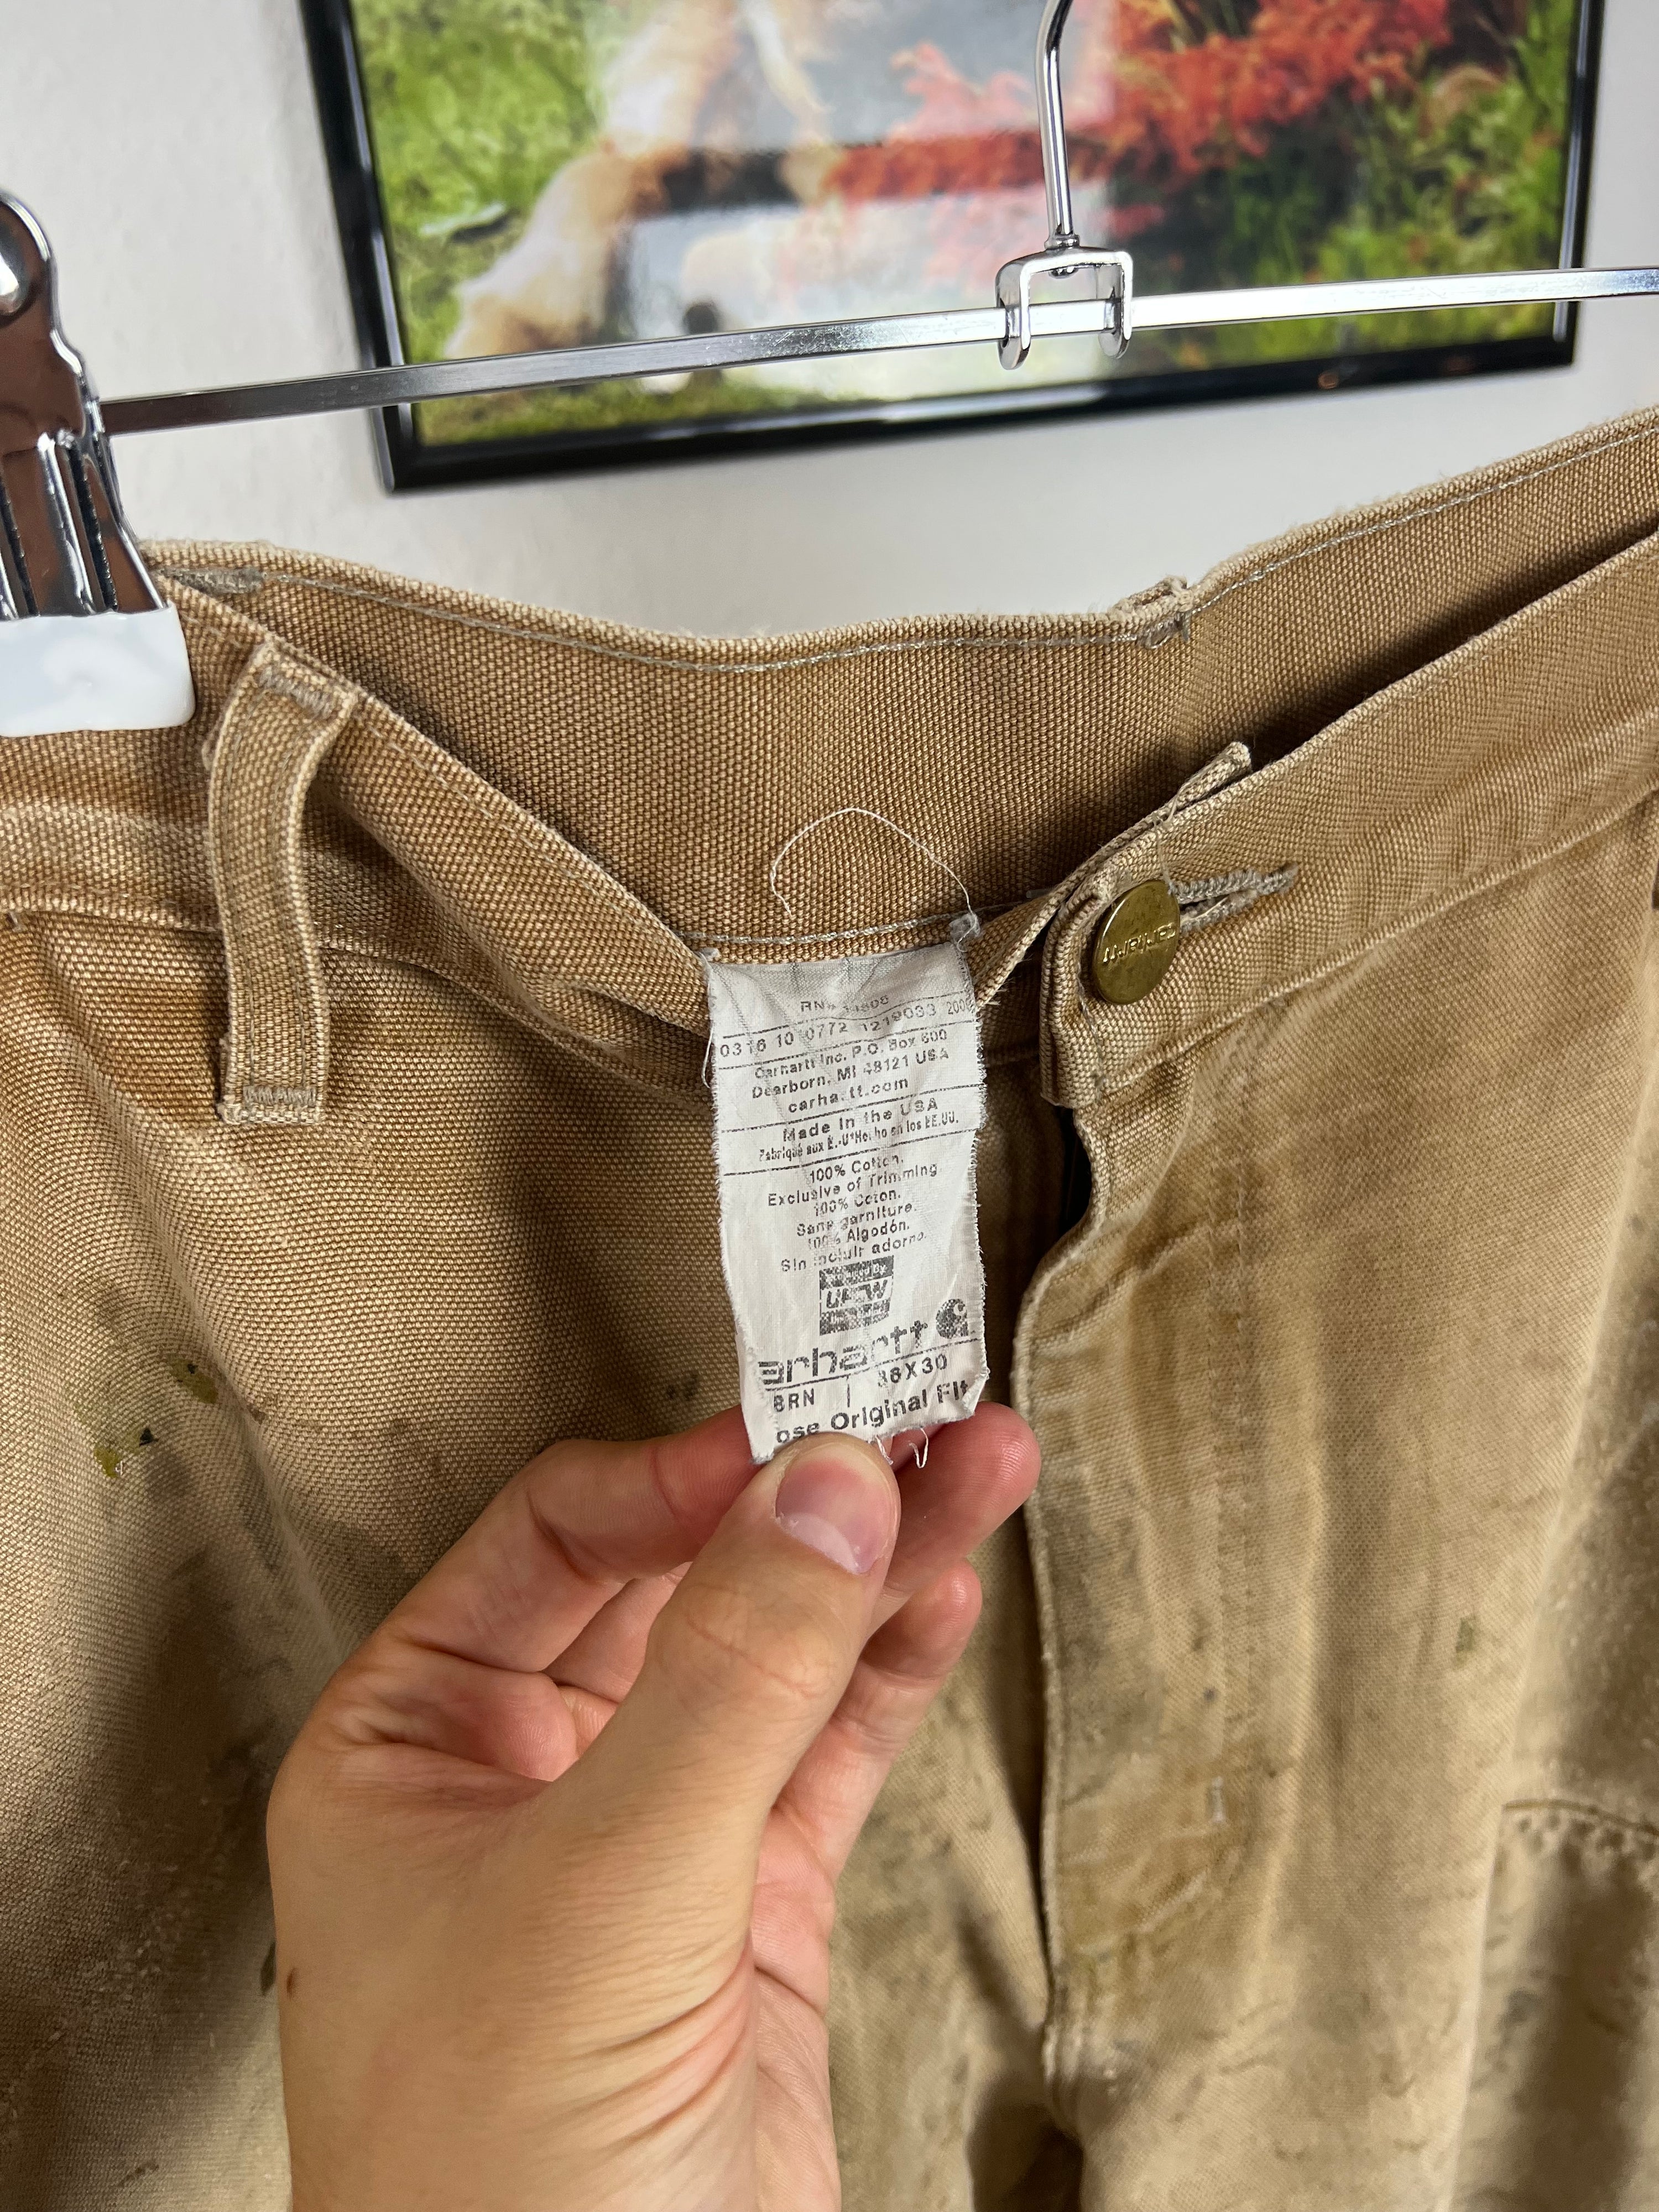 Vintage 90s Carhartt Double Knee Natural Faded (36/30)